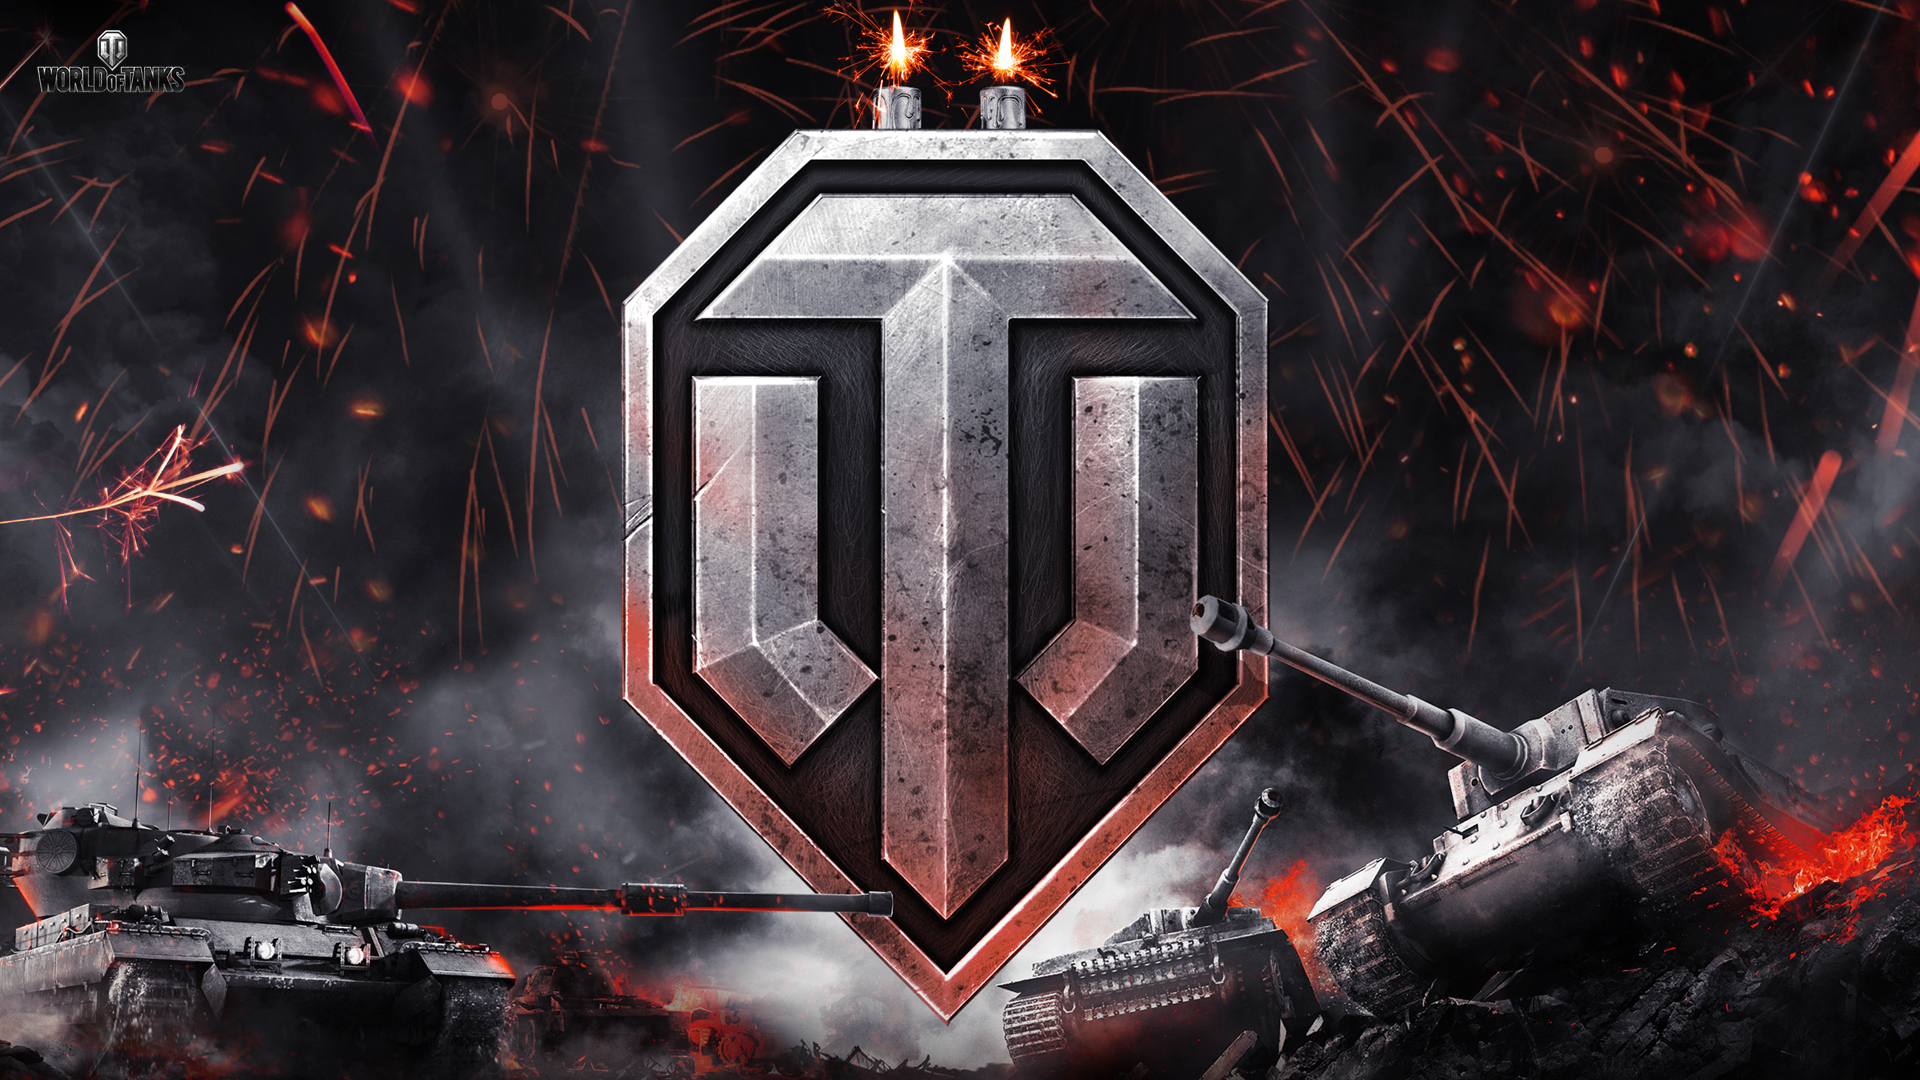 Special Second Anniversary of World of Tanks Server in Europe